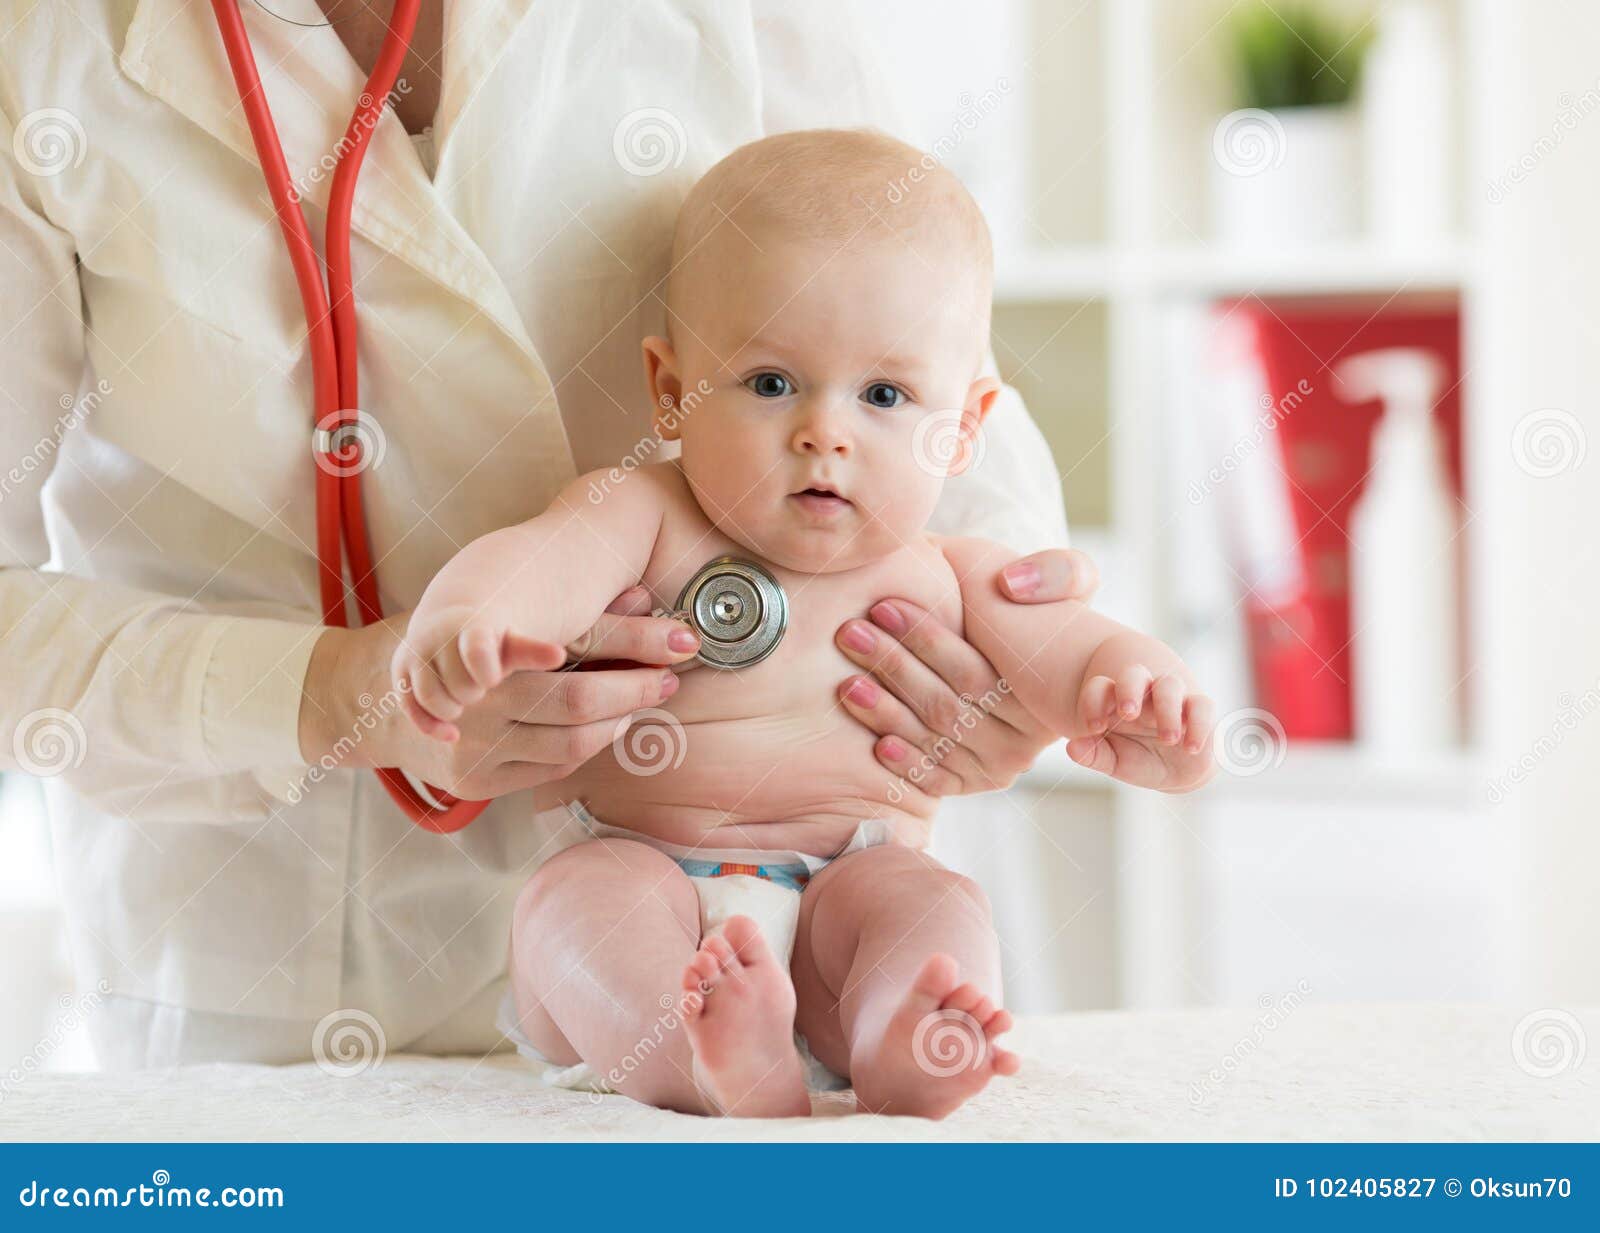 doctor pediatric examining little child in clinic. baby health concept